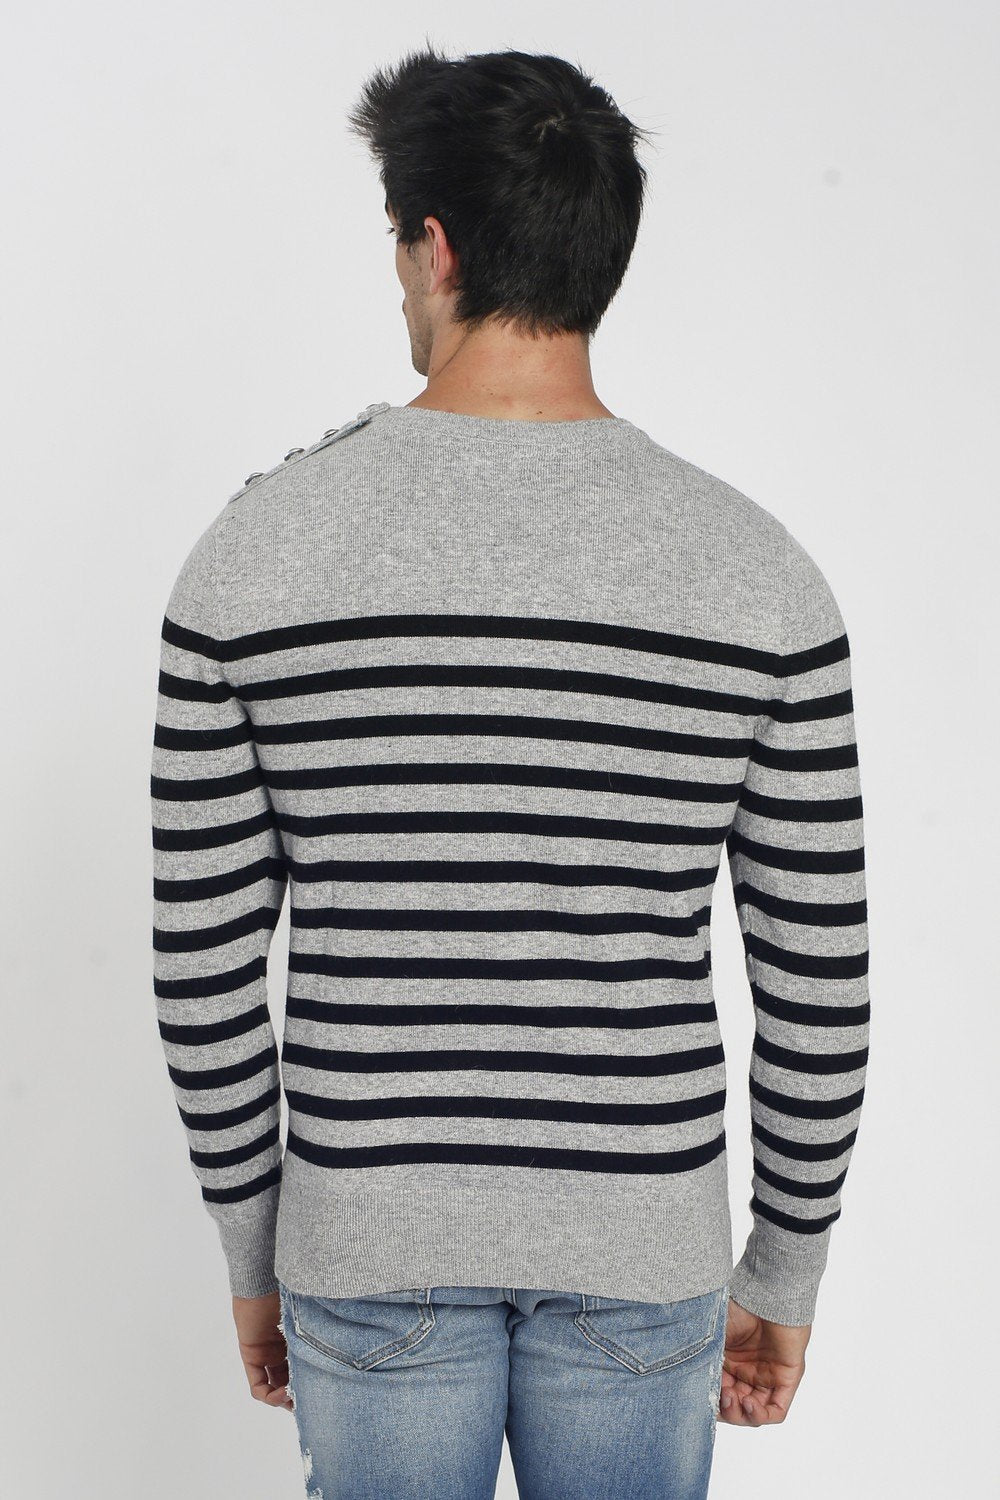 ROUND COLLAR SAILOR SWEATER WITH BUTTONS ON SHOULDER